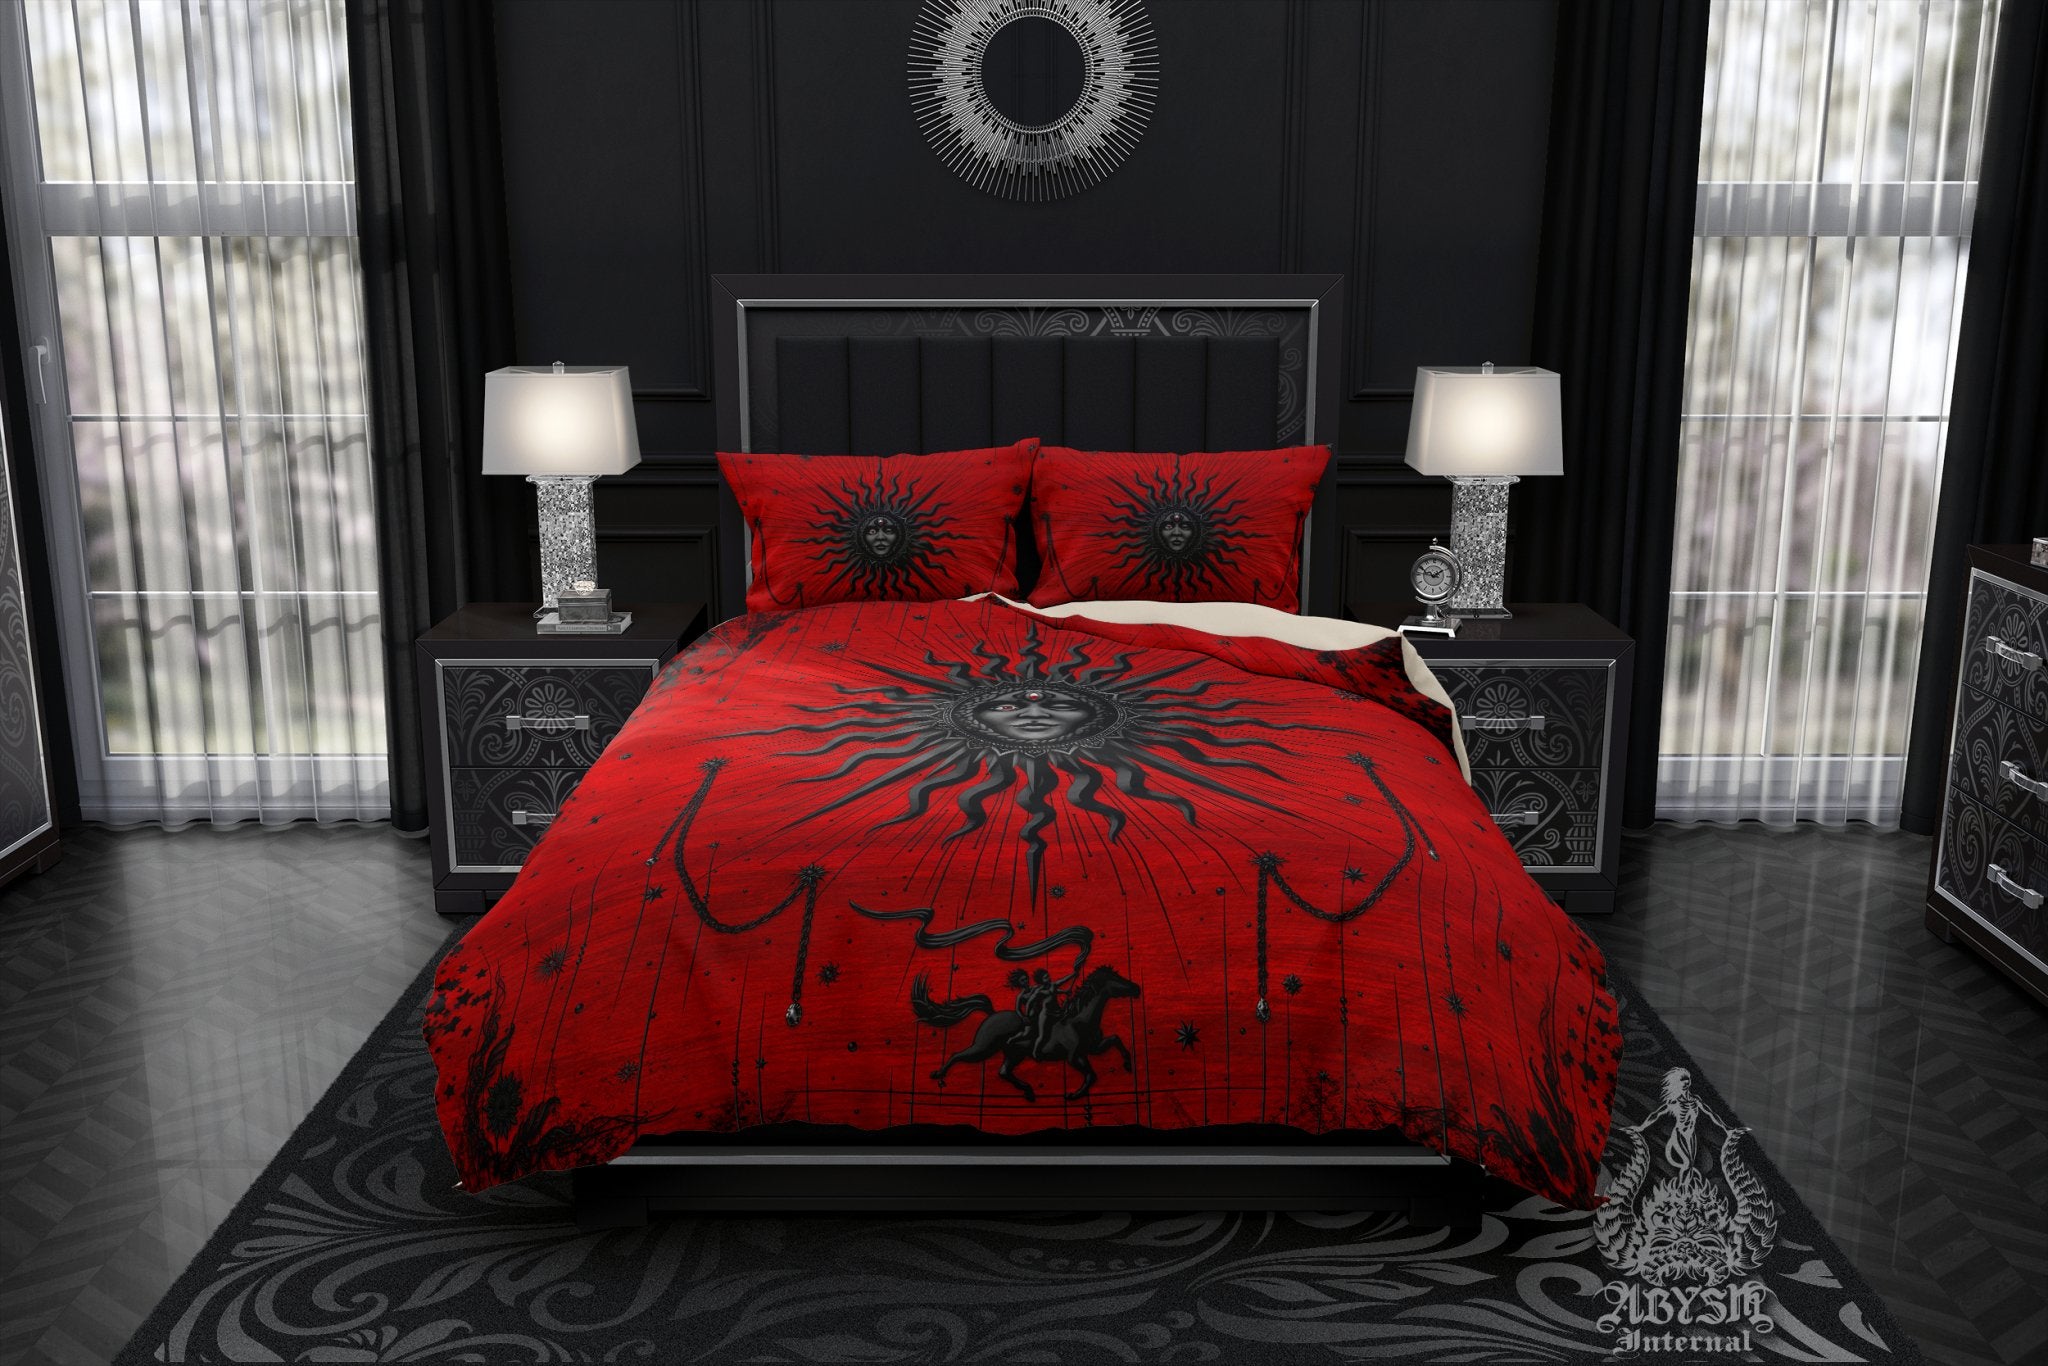 Bloody Gothic Sun Duvet Cover, Red and Black Bed Covering, Esoteric Comforter, Goth Bedroom Decor King, Queen & Twin Bedding Set - Tarot Arcana Art - Abysm Internal